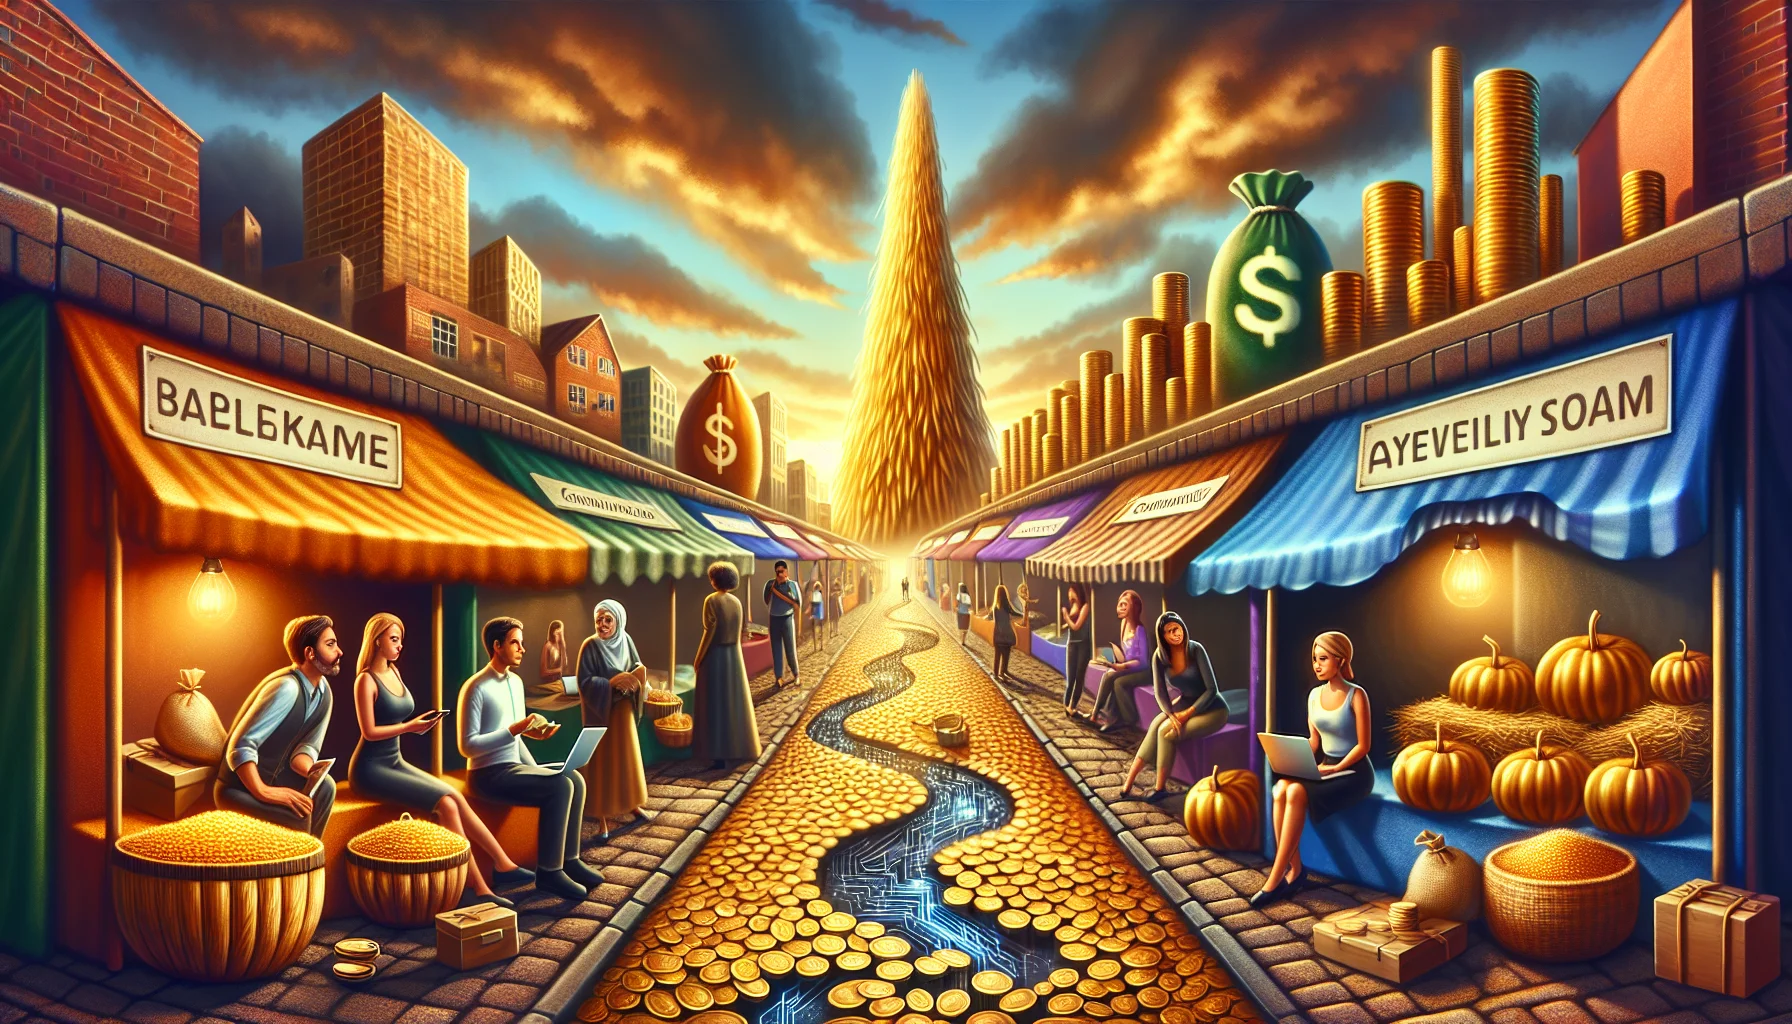 Imagine a whimsical street market at sunset with stalls, each representing an abstract notion of a top affiliate network. Each stall is uniquely decorated - one looks like a golden haystack indicating steady income, another resembles a towering beanstalk suggesting high growth potential, while another depicts a river of digital coins flowing from a laptop screen. Here, diverse people from all walks of life - a Middle-Eastern female entrepreneur, a Caucasian male retiree, a South Asian teenager, a Black working mom - all engaged and intrigued by the opportunity these stalls represent. Their eyes gleam with both humor and ambition under the golden twilight.